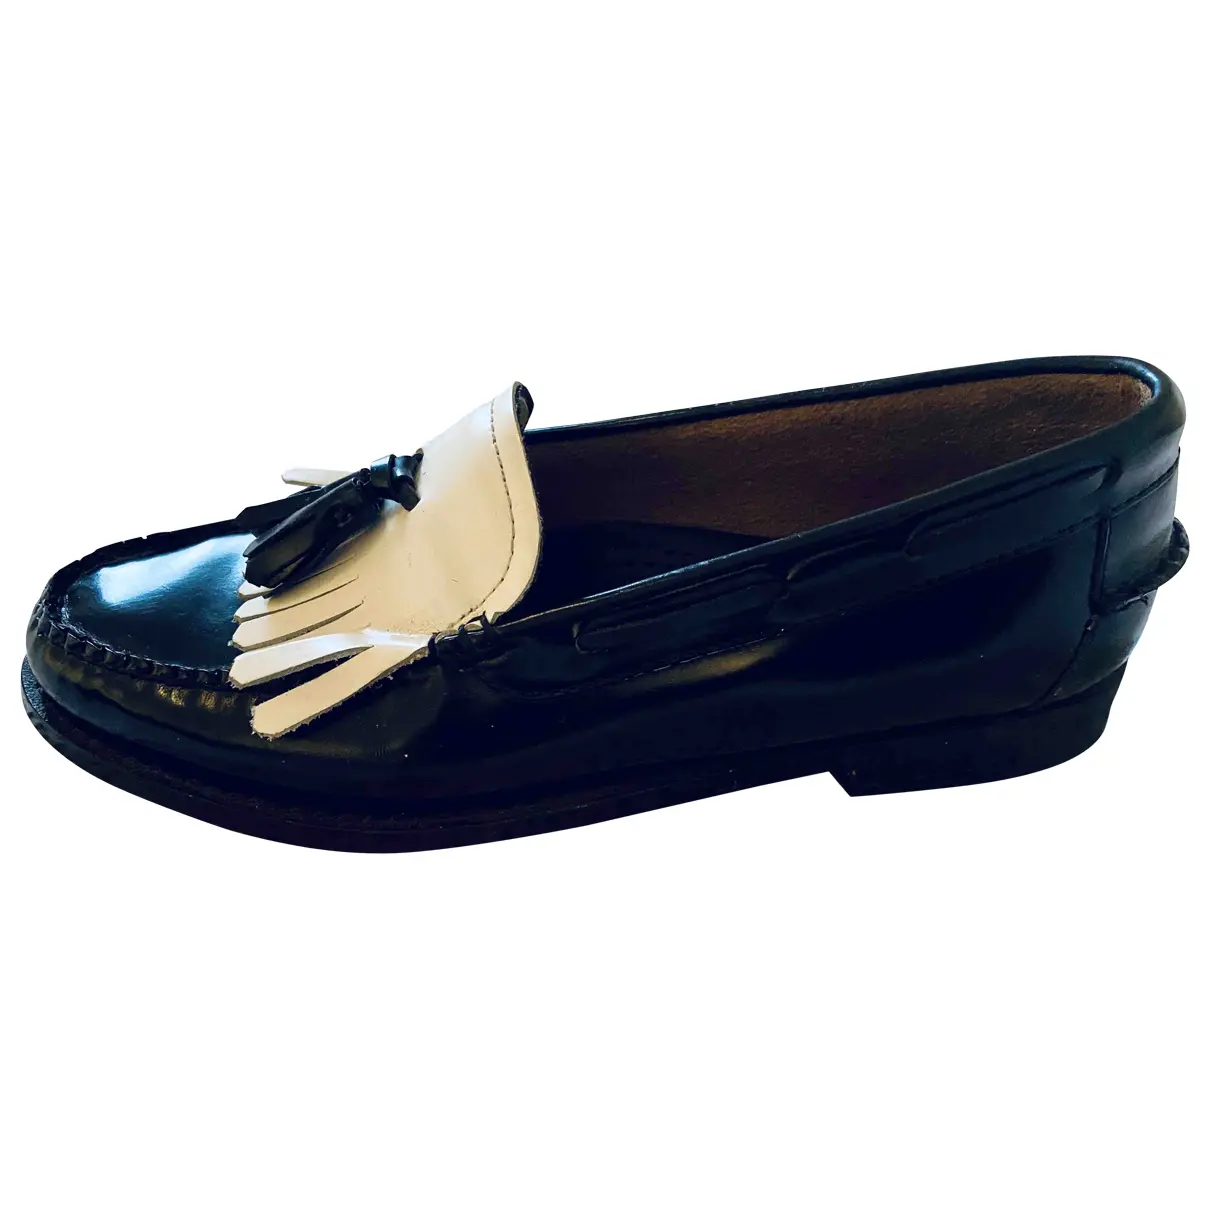 Patent leather flats Bass Weejun